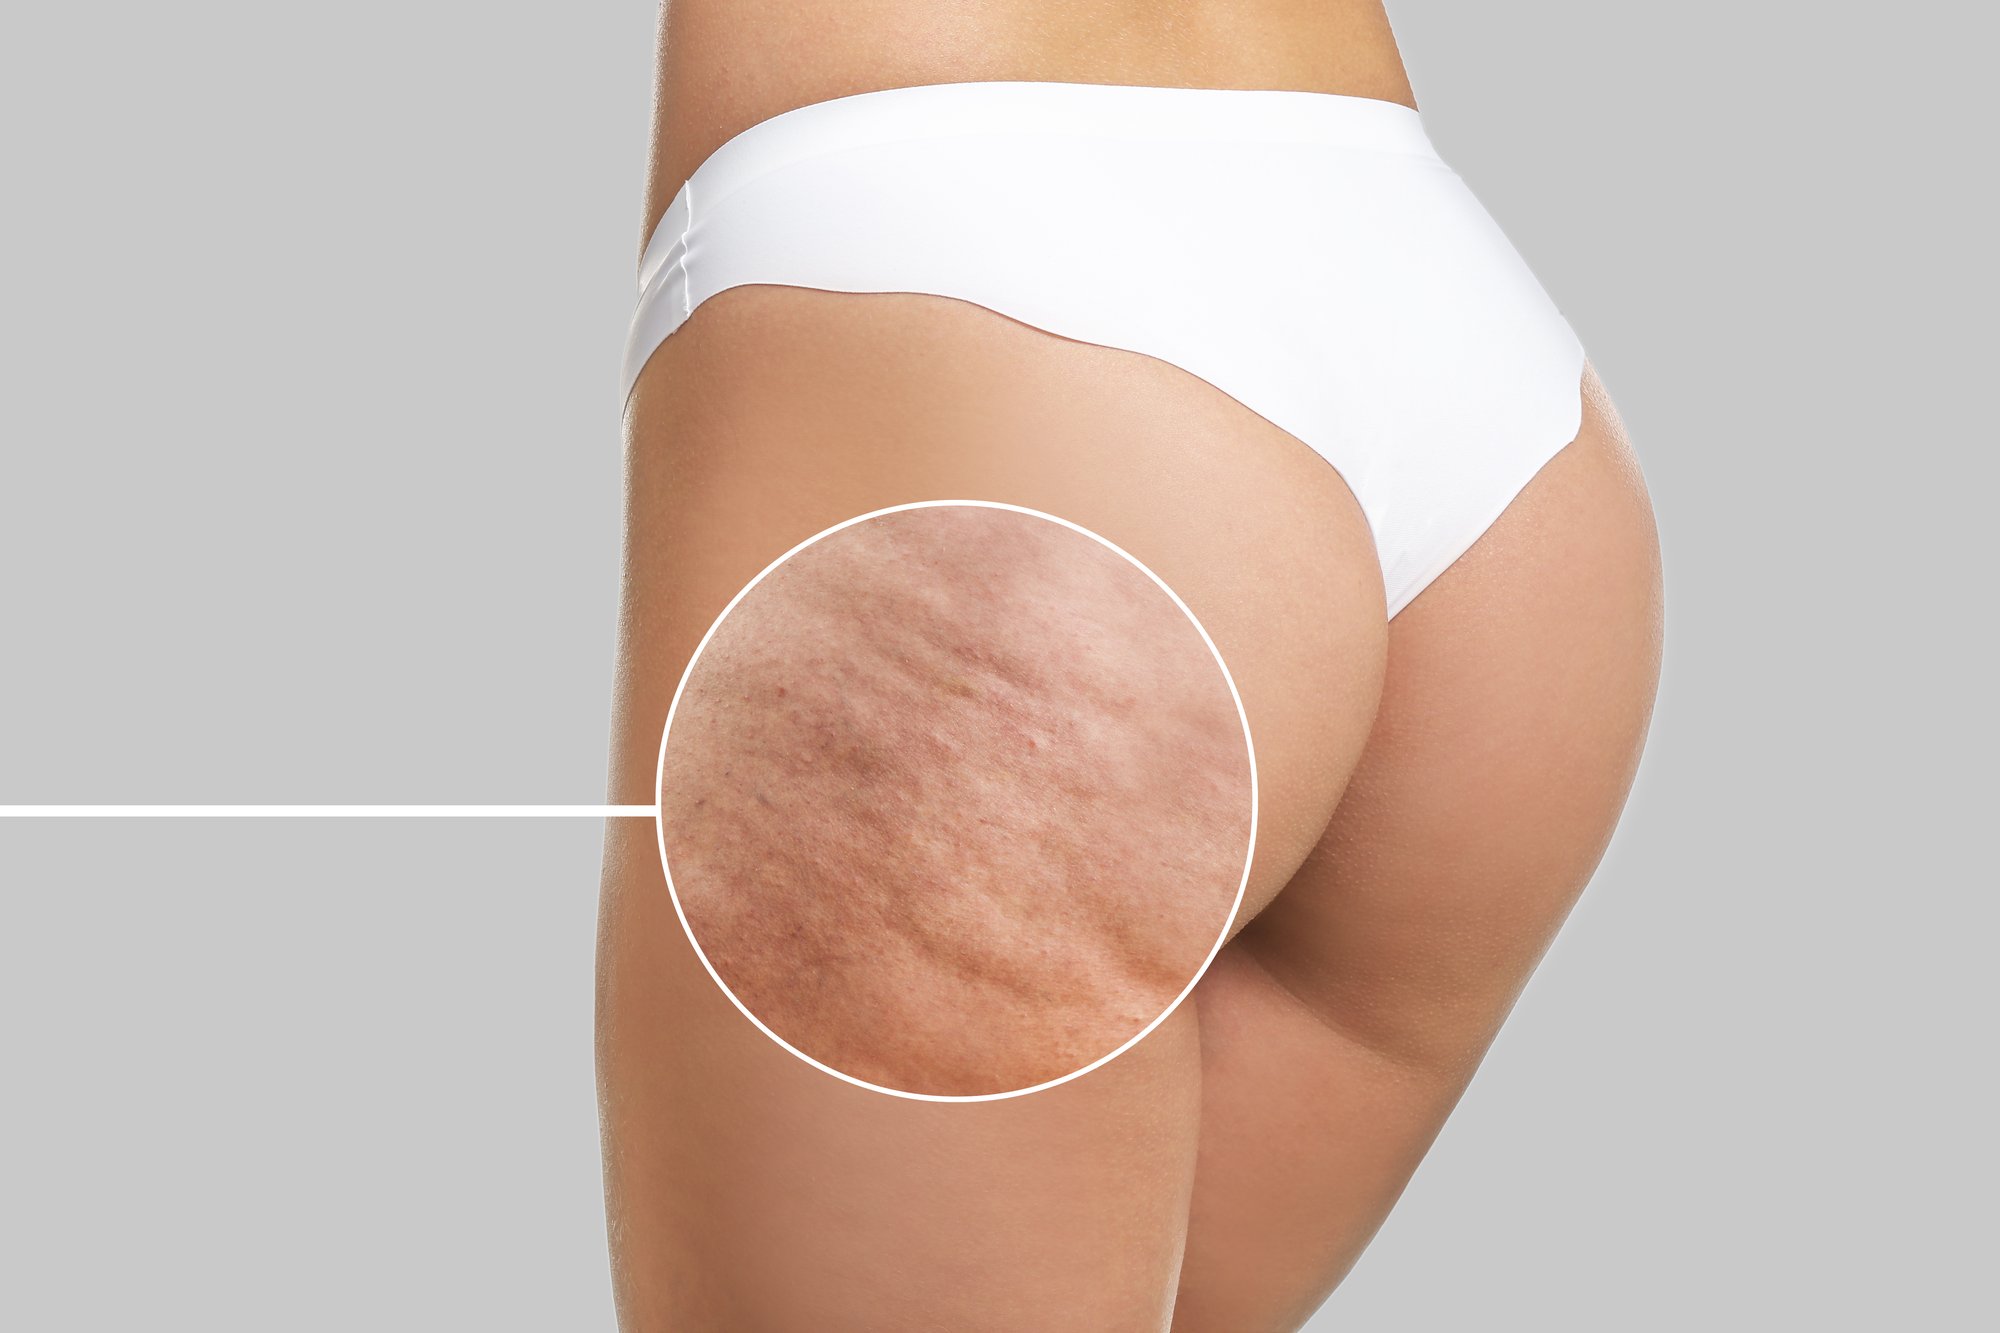 SlimSpec the Science behind Cellulite Reduction